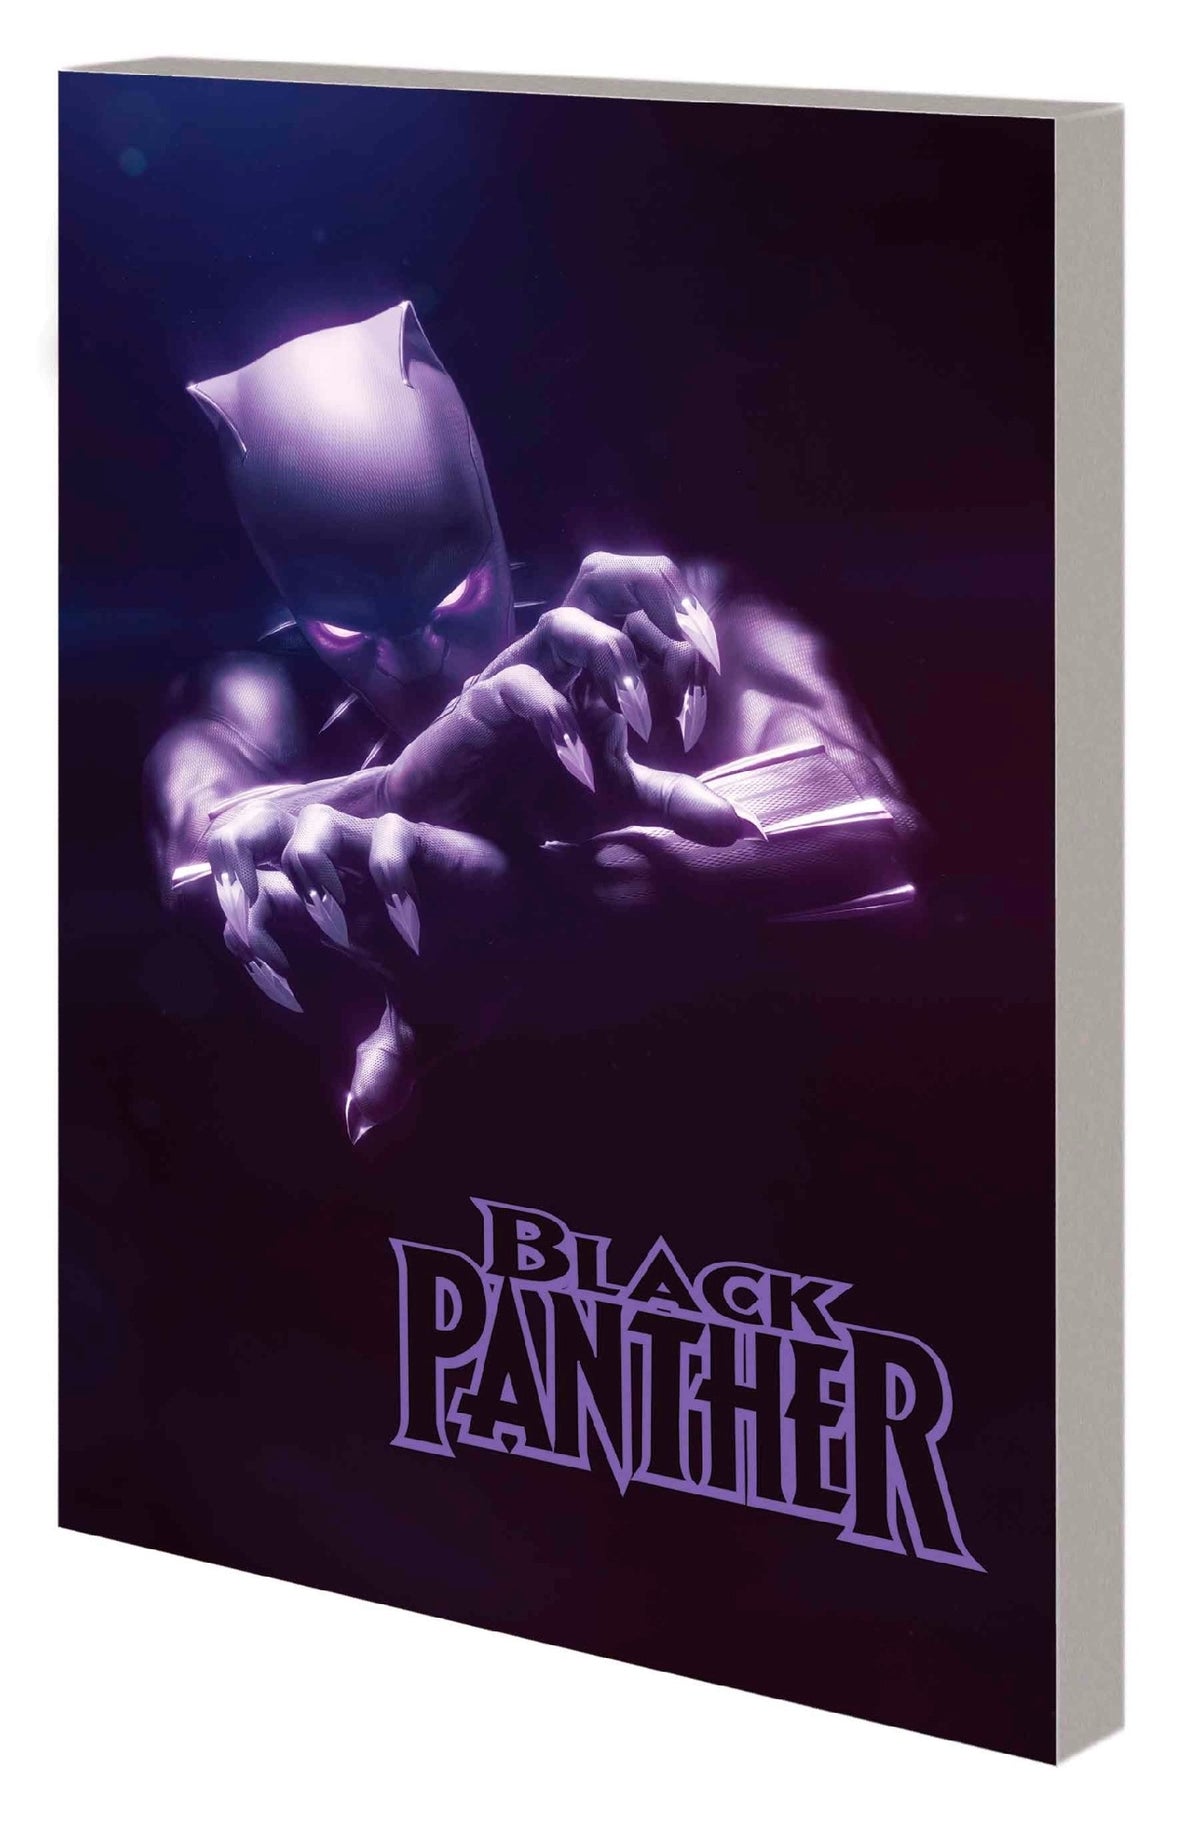 BLACK PANTHER BY EVE L. EWING: REIGN AT DUSK VOL. 1